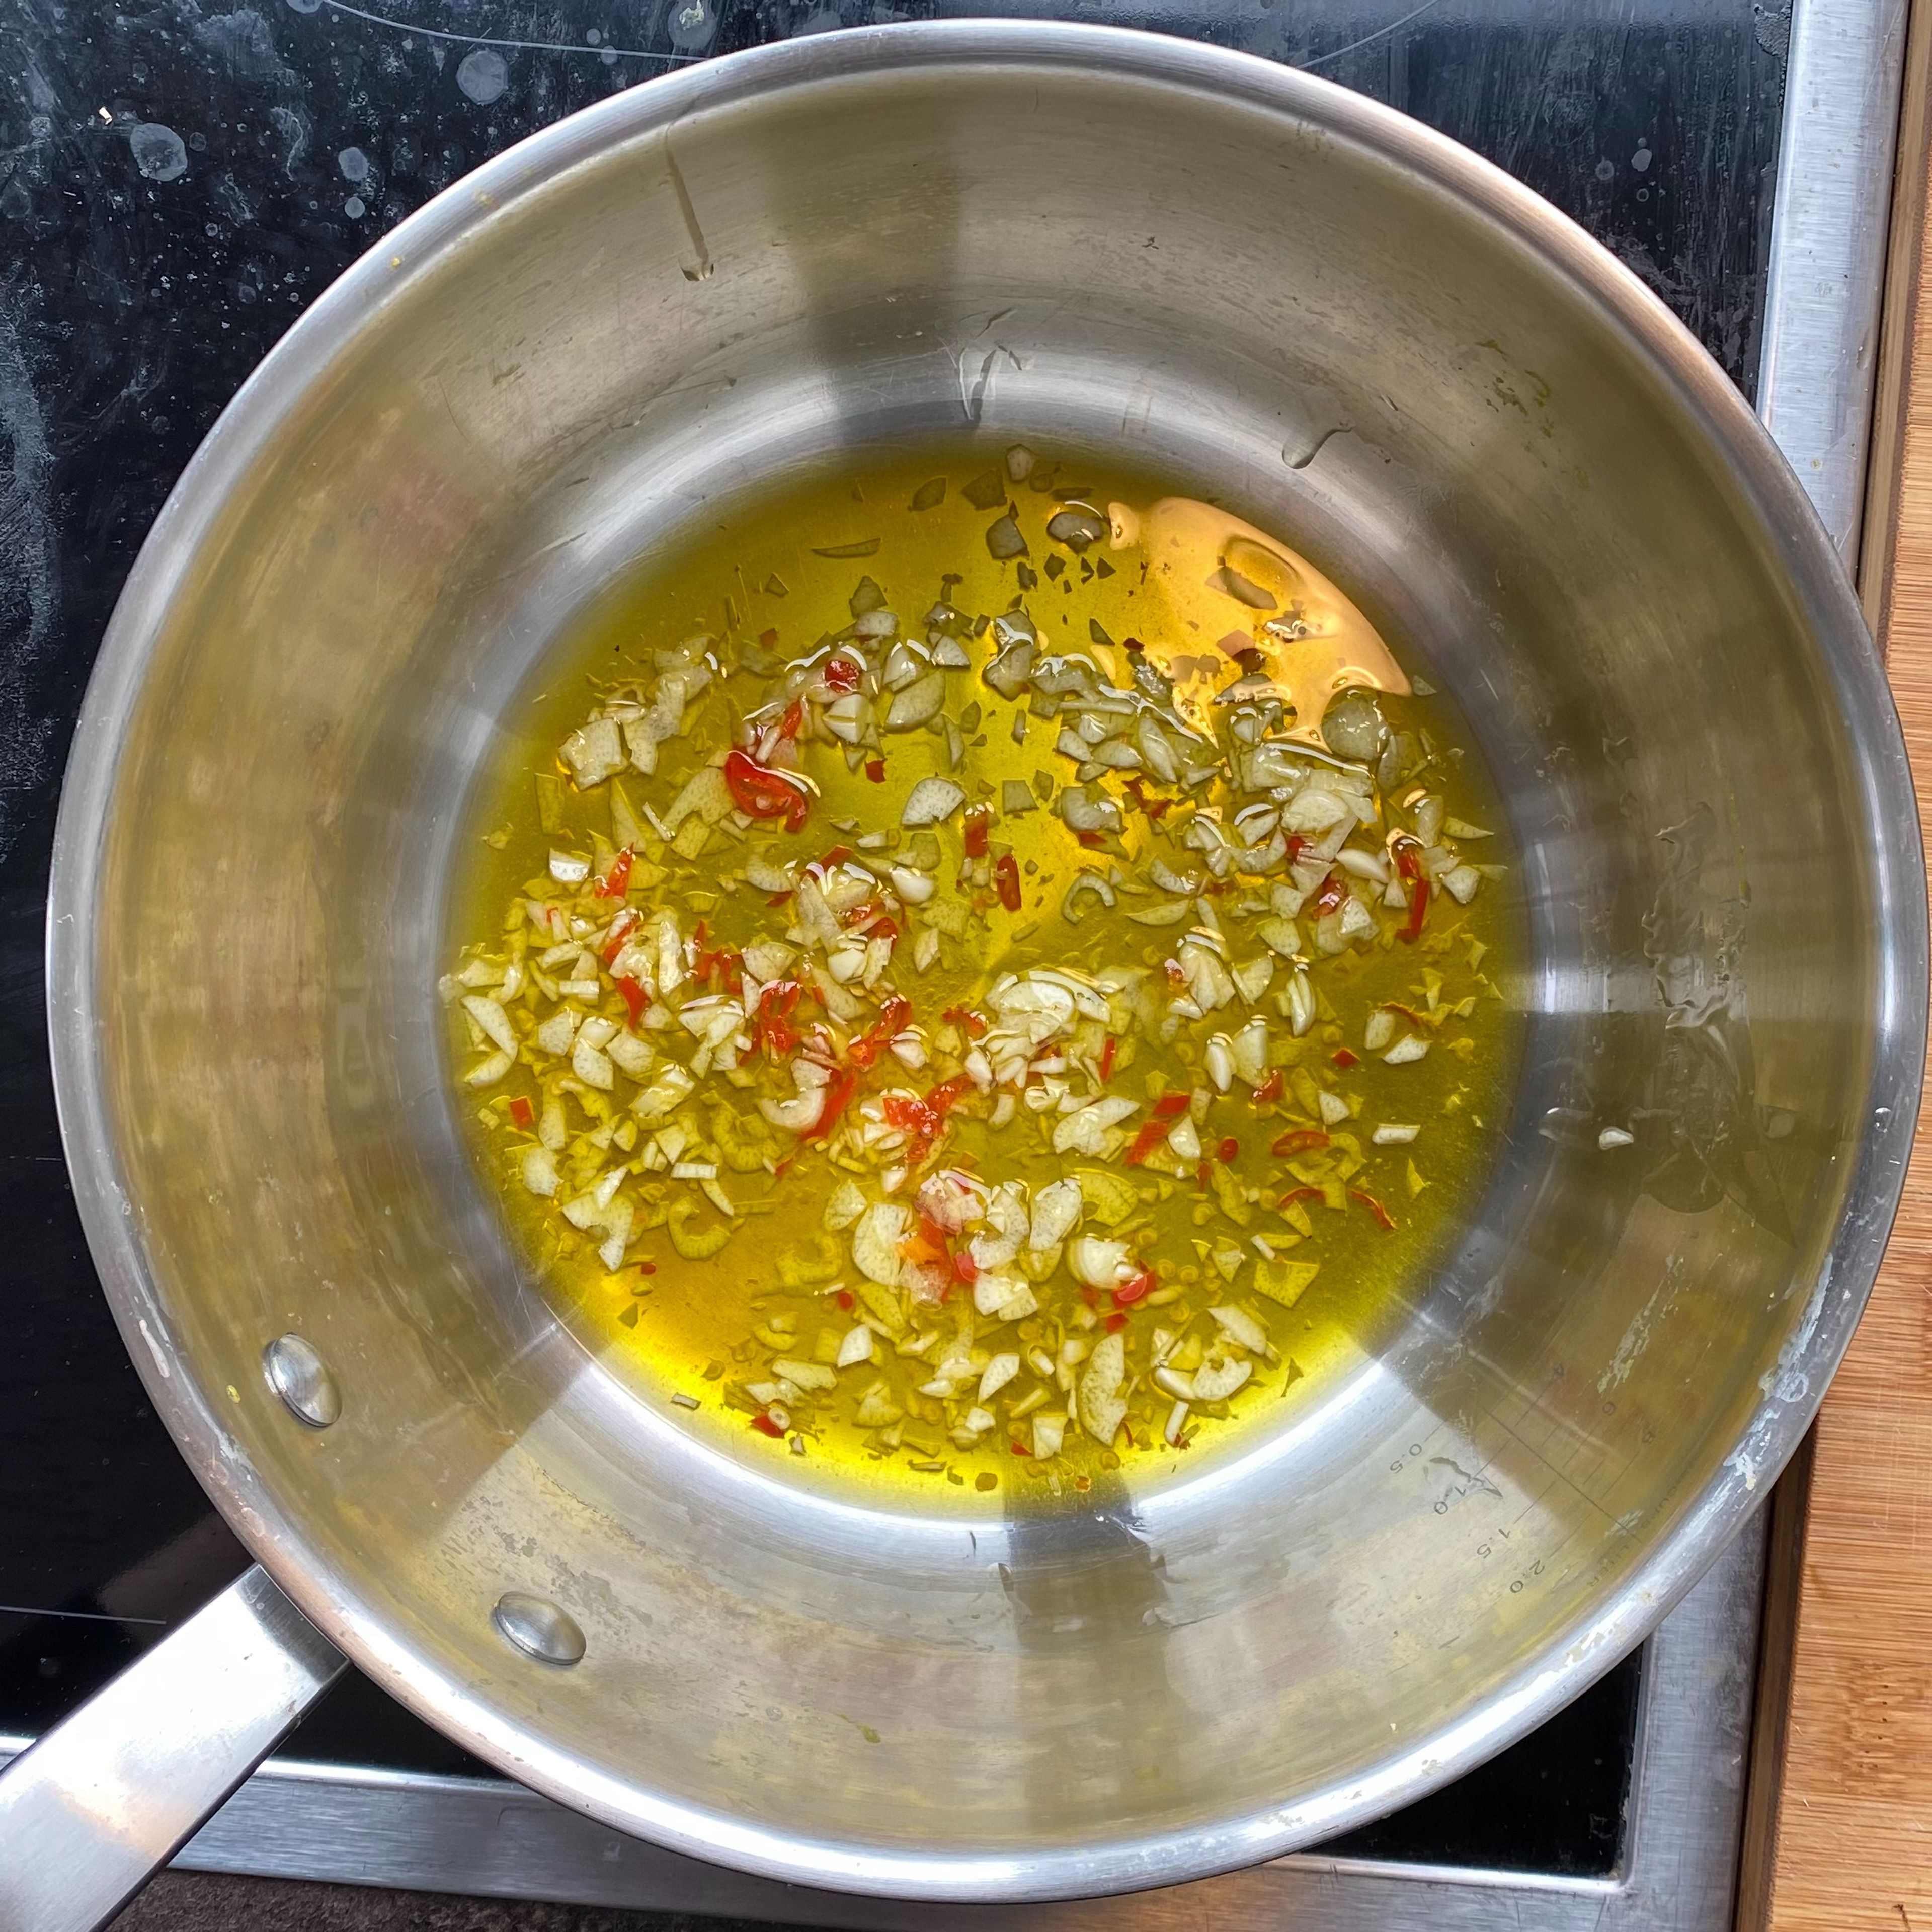 Put the olive oil, garlic, chili and the lemon zest in a large pan and let the mixture soak for a couple of minutes. I recommend at least 5 minutes. The longer it soakes the more taste you get:)